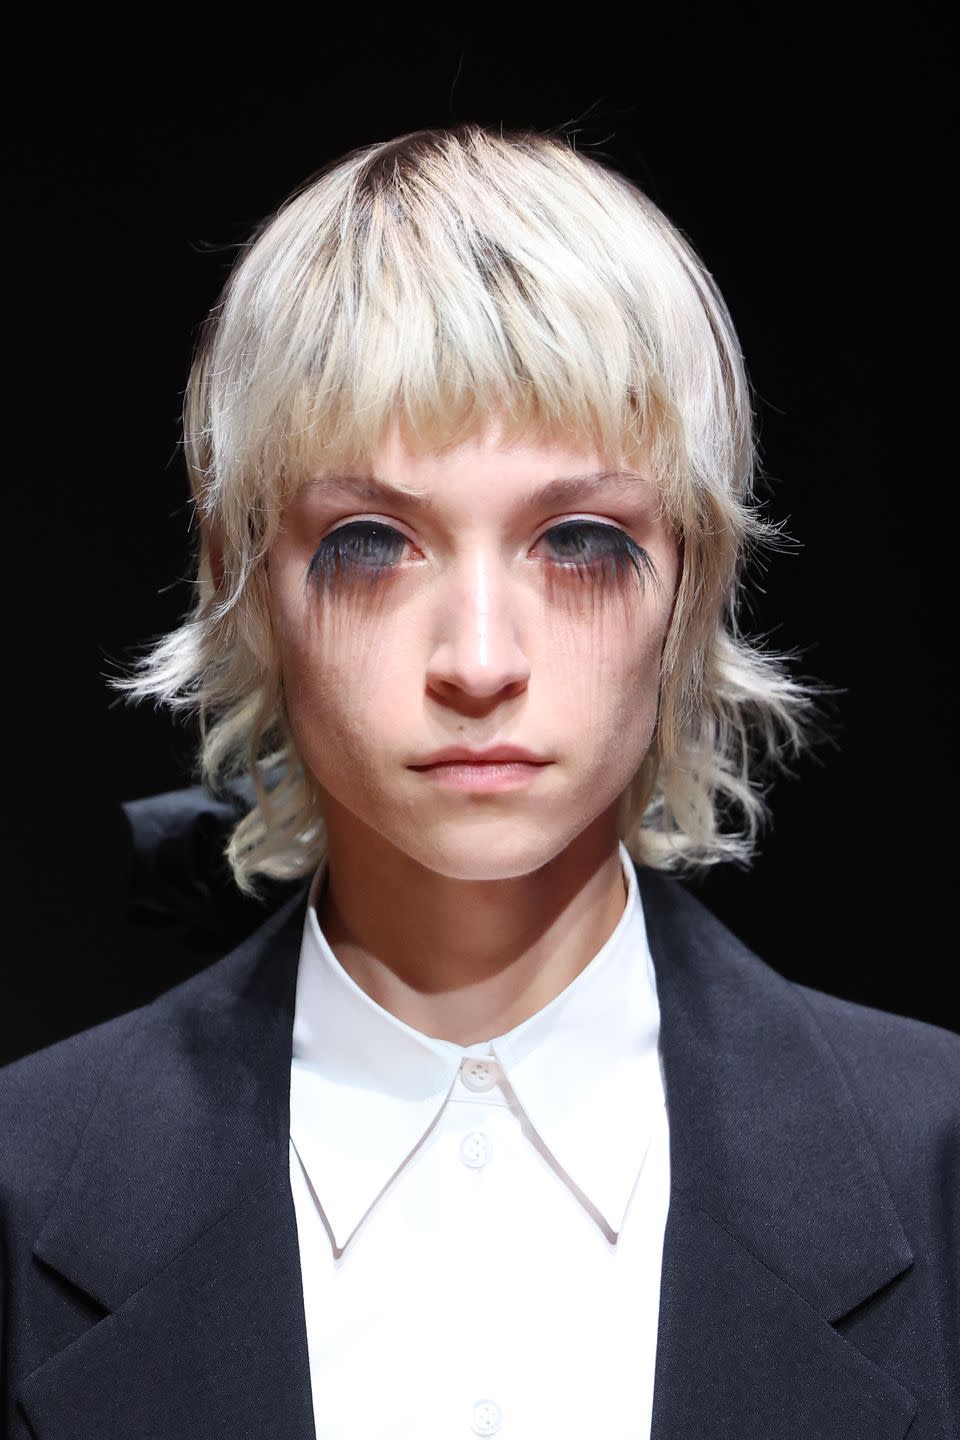 <p>A graduate of the University of Warsaw, Alin is a non-binary actor, artist, and welder. They were the closing model for Prada's spring 2023 show, making them officially one to watch.</p>